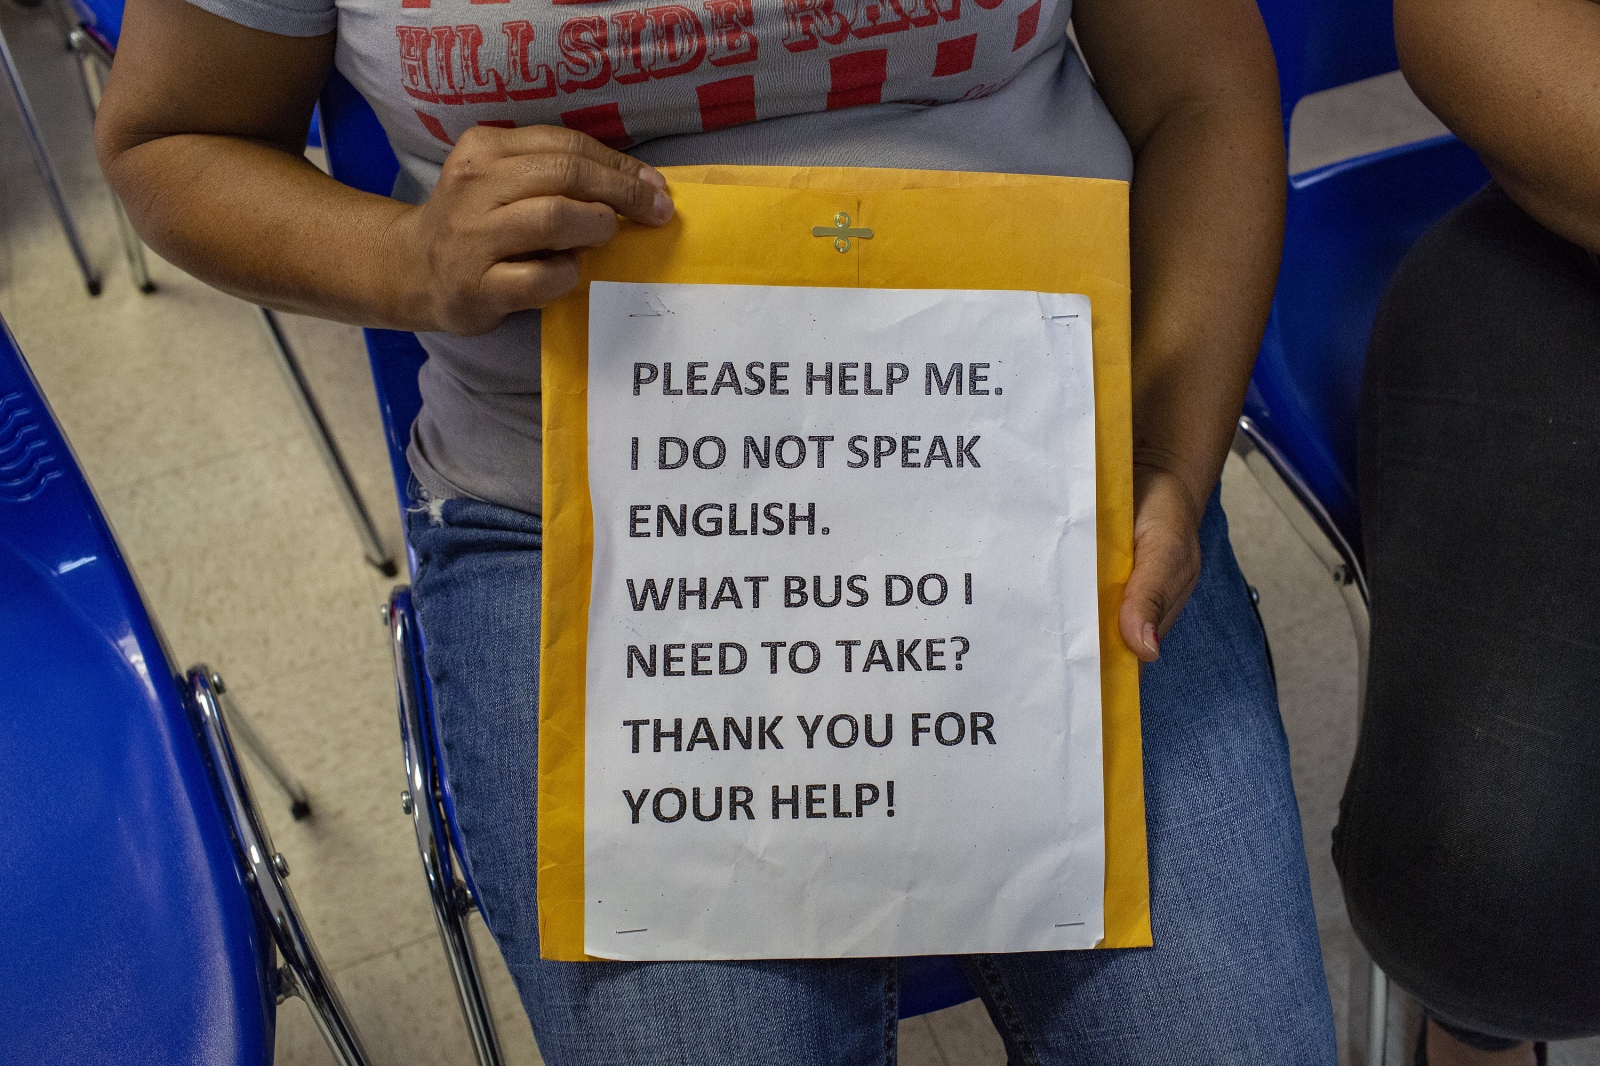  I met a Central American migrant woman and her son from Catholic Charities in McAllen, Texas, who just got released from detention. The woman holds a sign that says " Please help me I do not speak English." This sign will help them as they travel across the U.S. to join other family members. (Kevin C Downs/Agence Cosmos) 